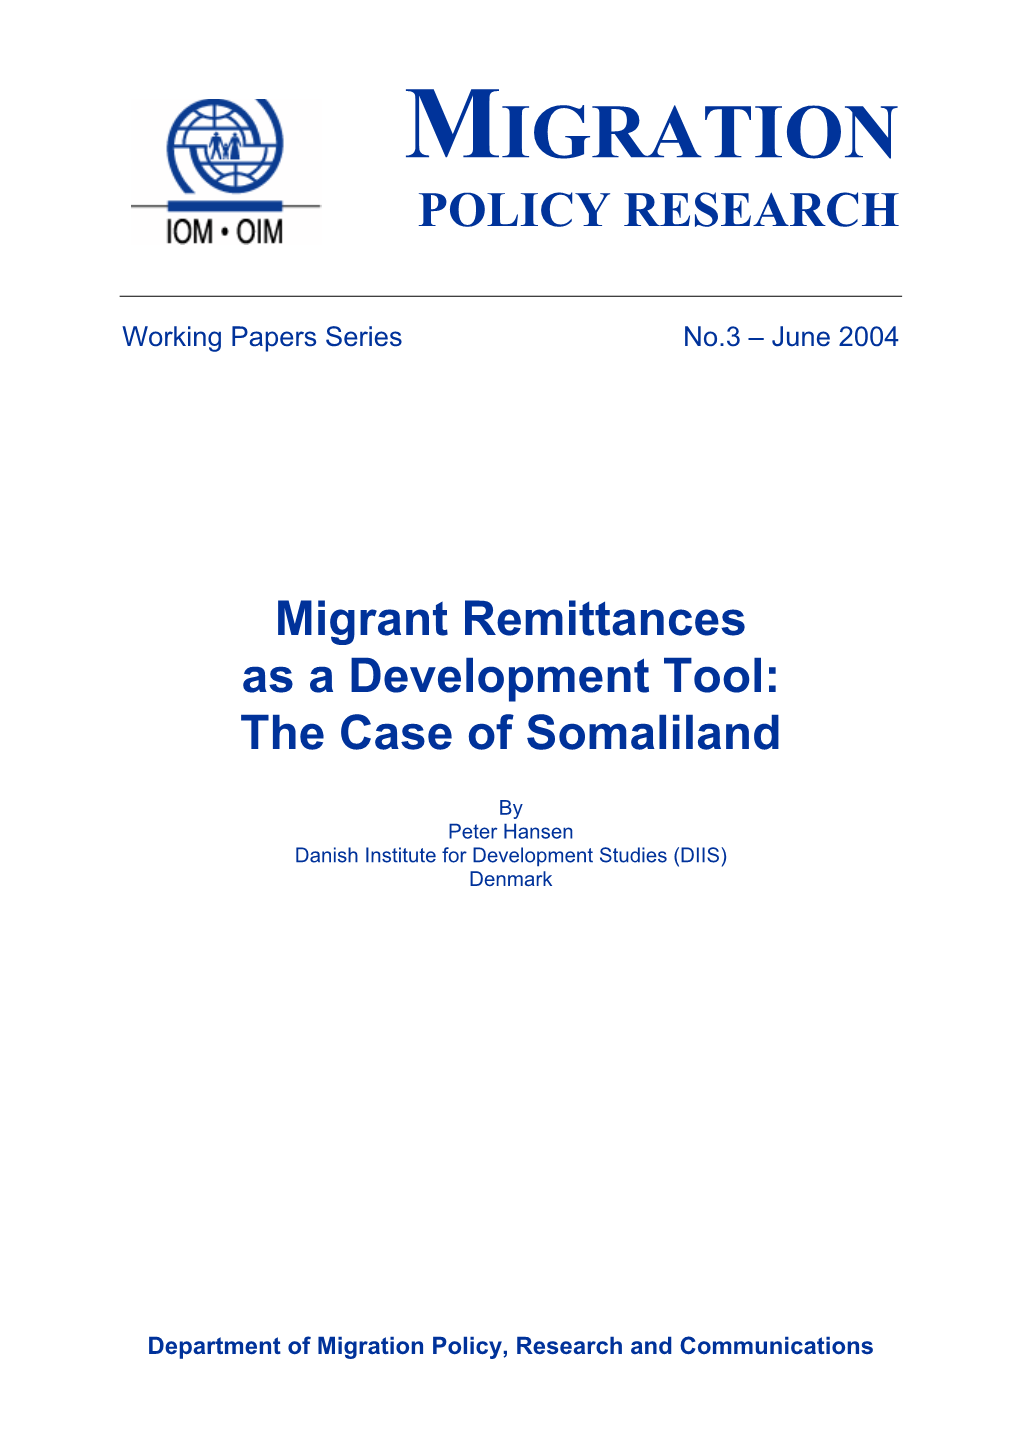 Migrant Remittances As a Development Tool: the Case of Somaliland